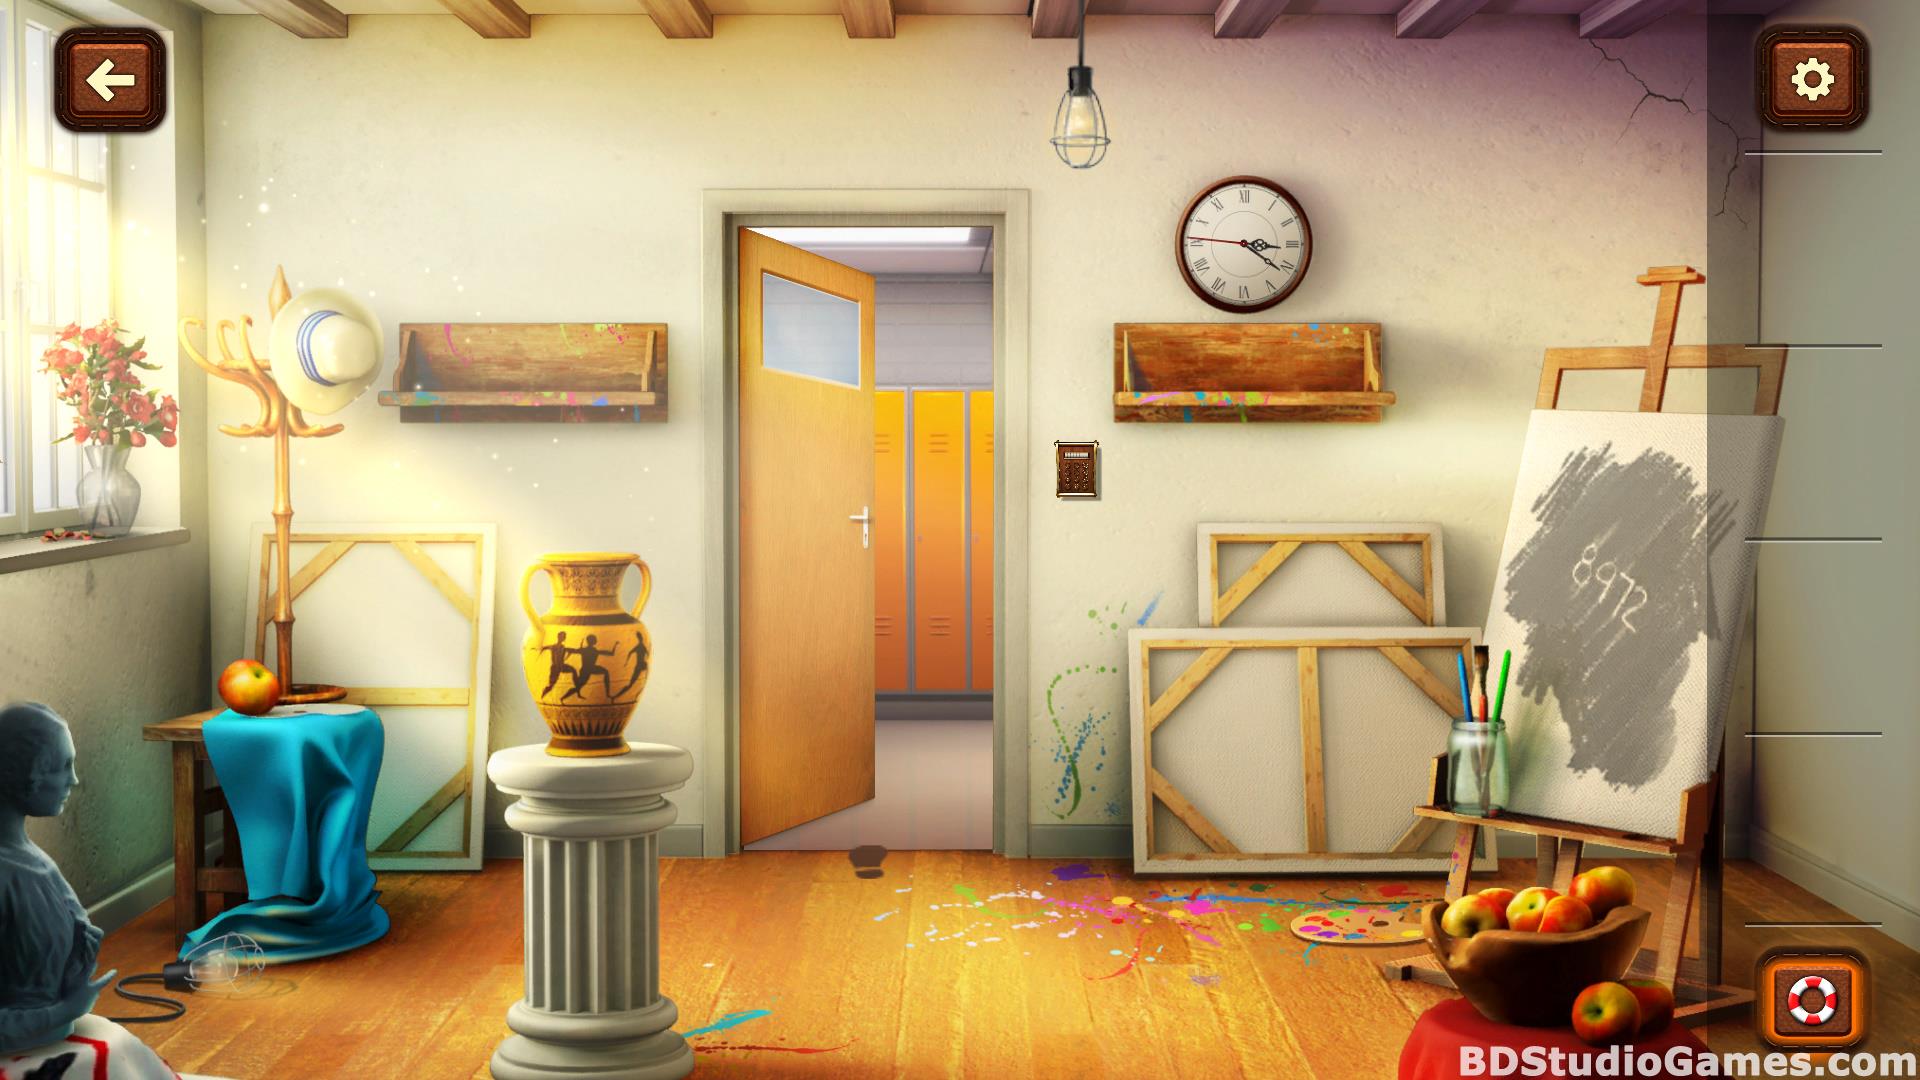 100 doors game free download for windows 7 download deepfacelab for windows